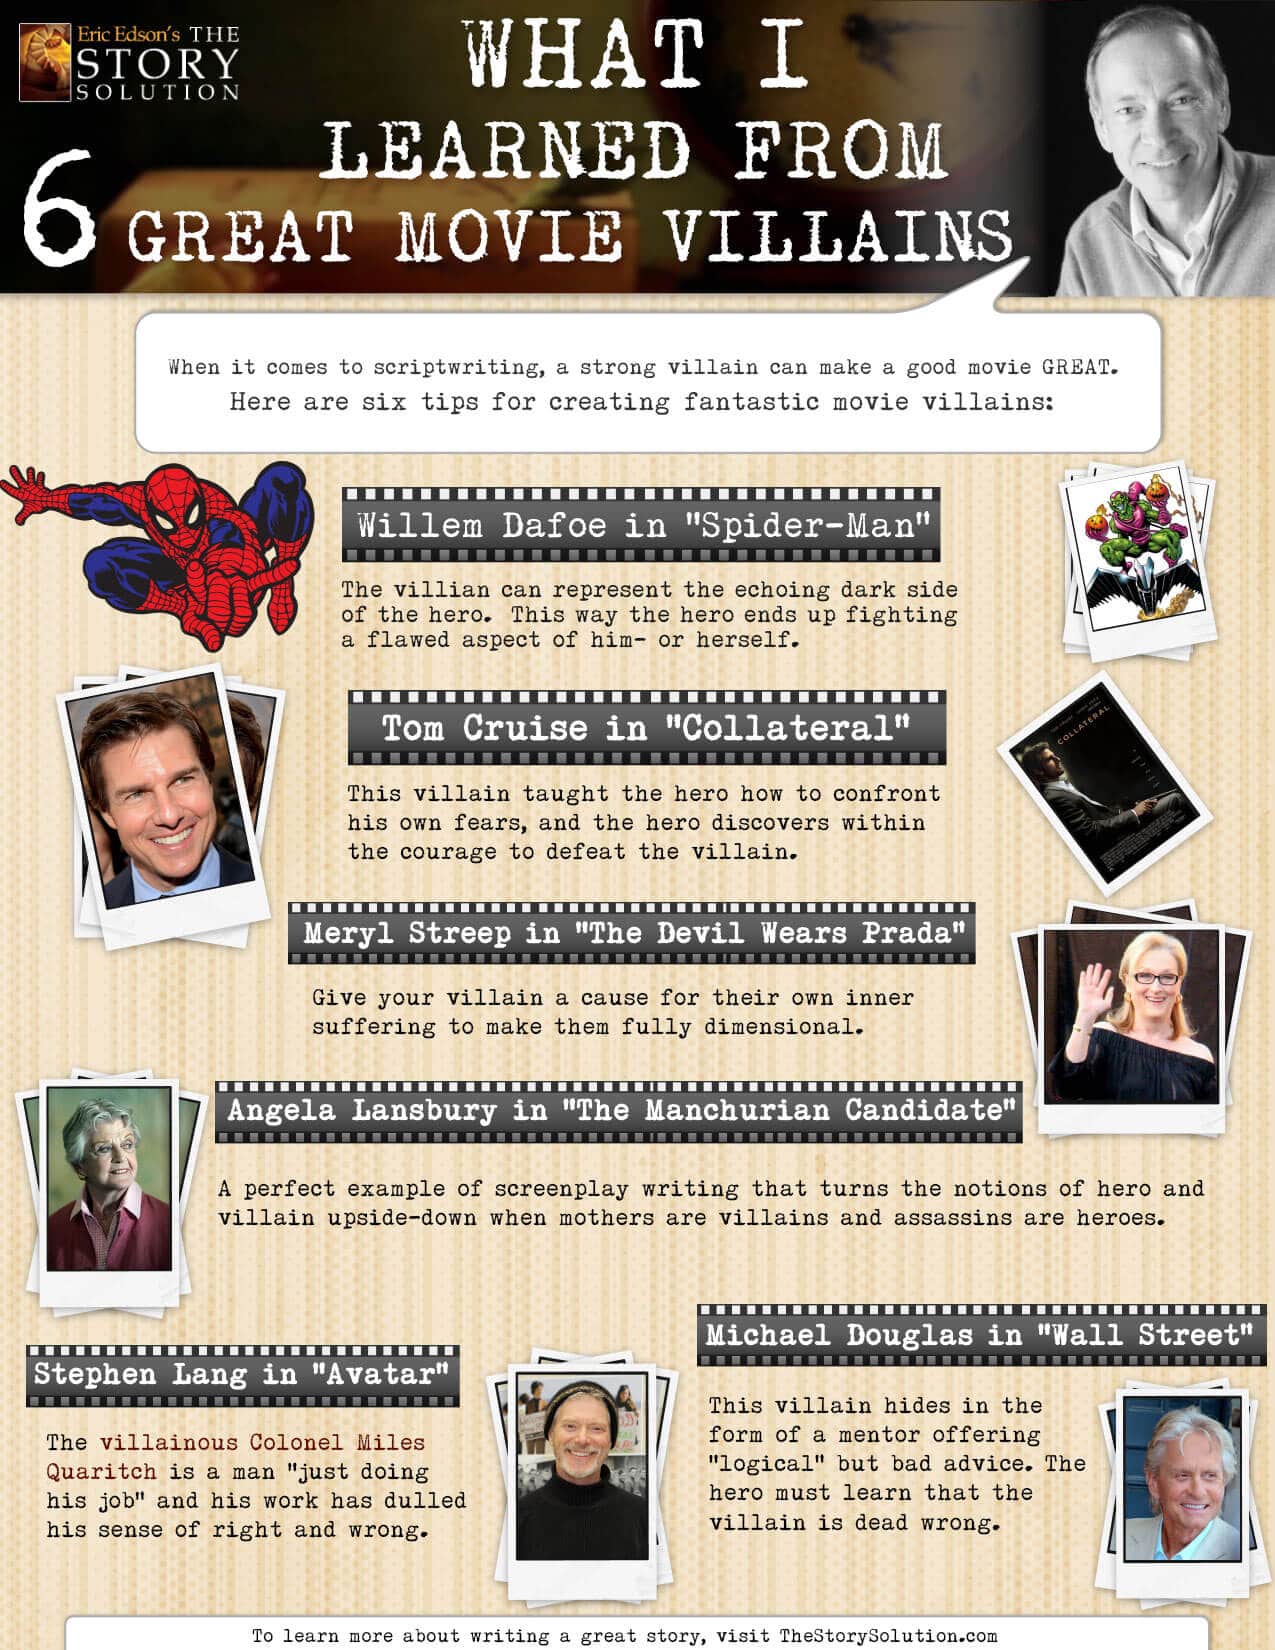 What I learned From 6 Great Movie Villains - Screenwriting Infographic - By Eric Edson